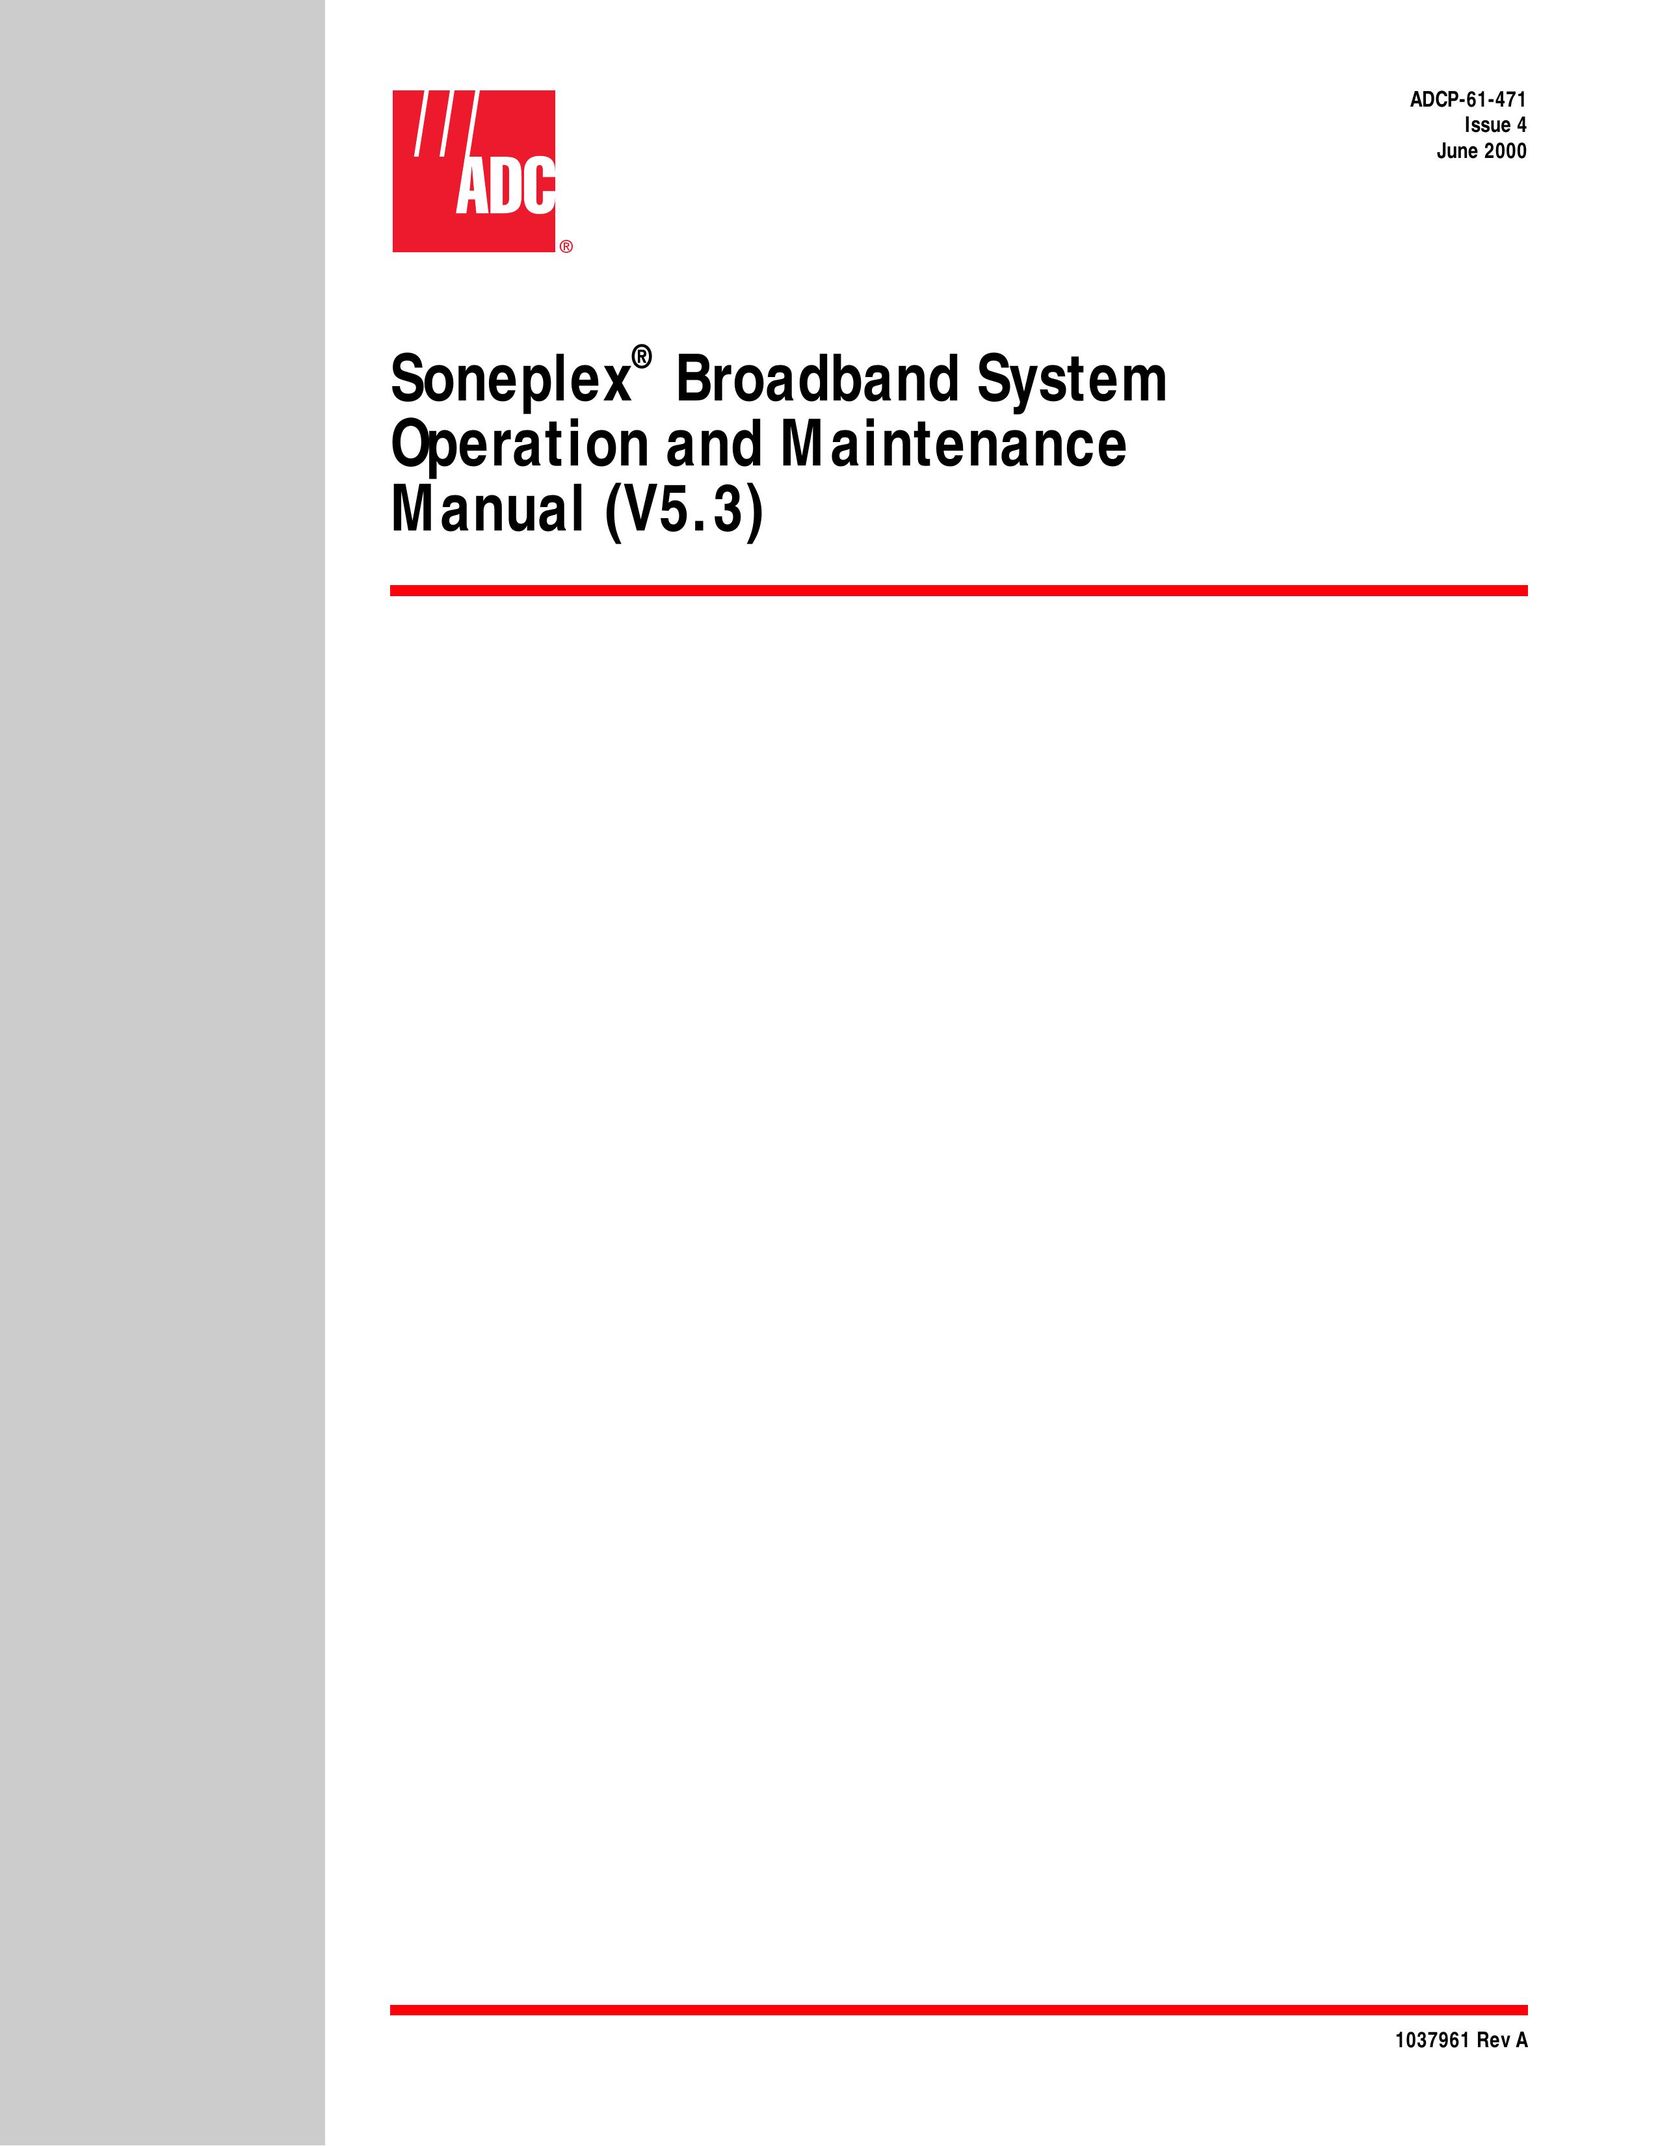 ADC Broadband System Network Router User Manual